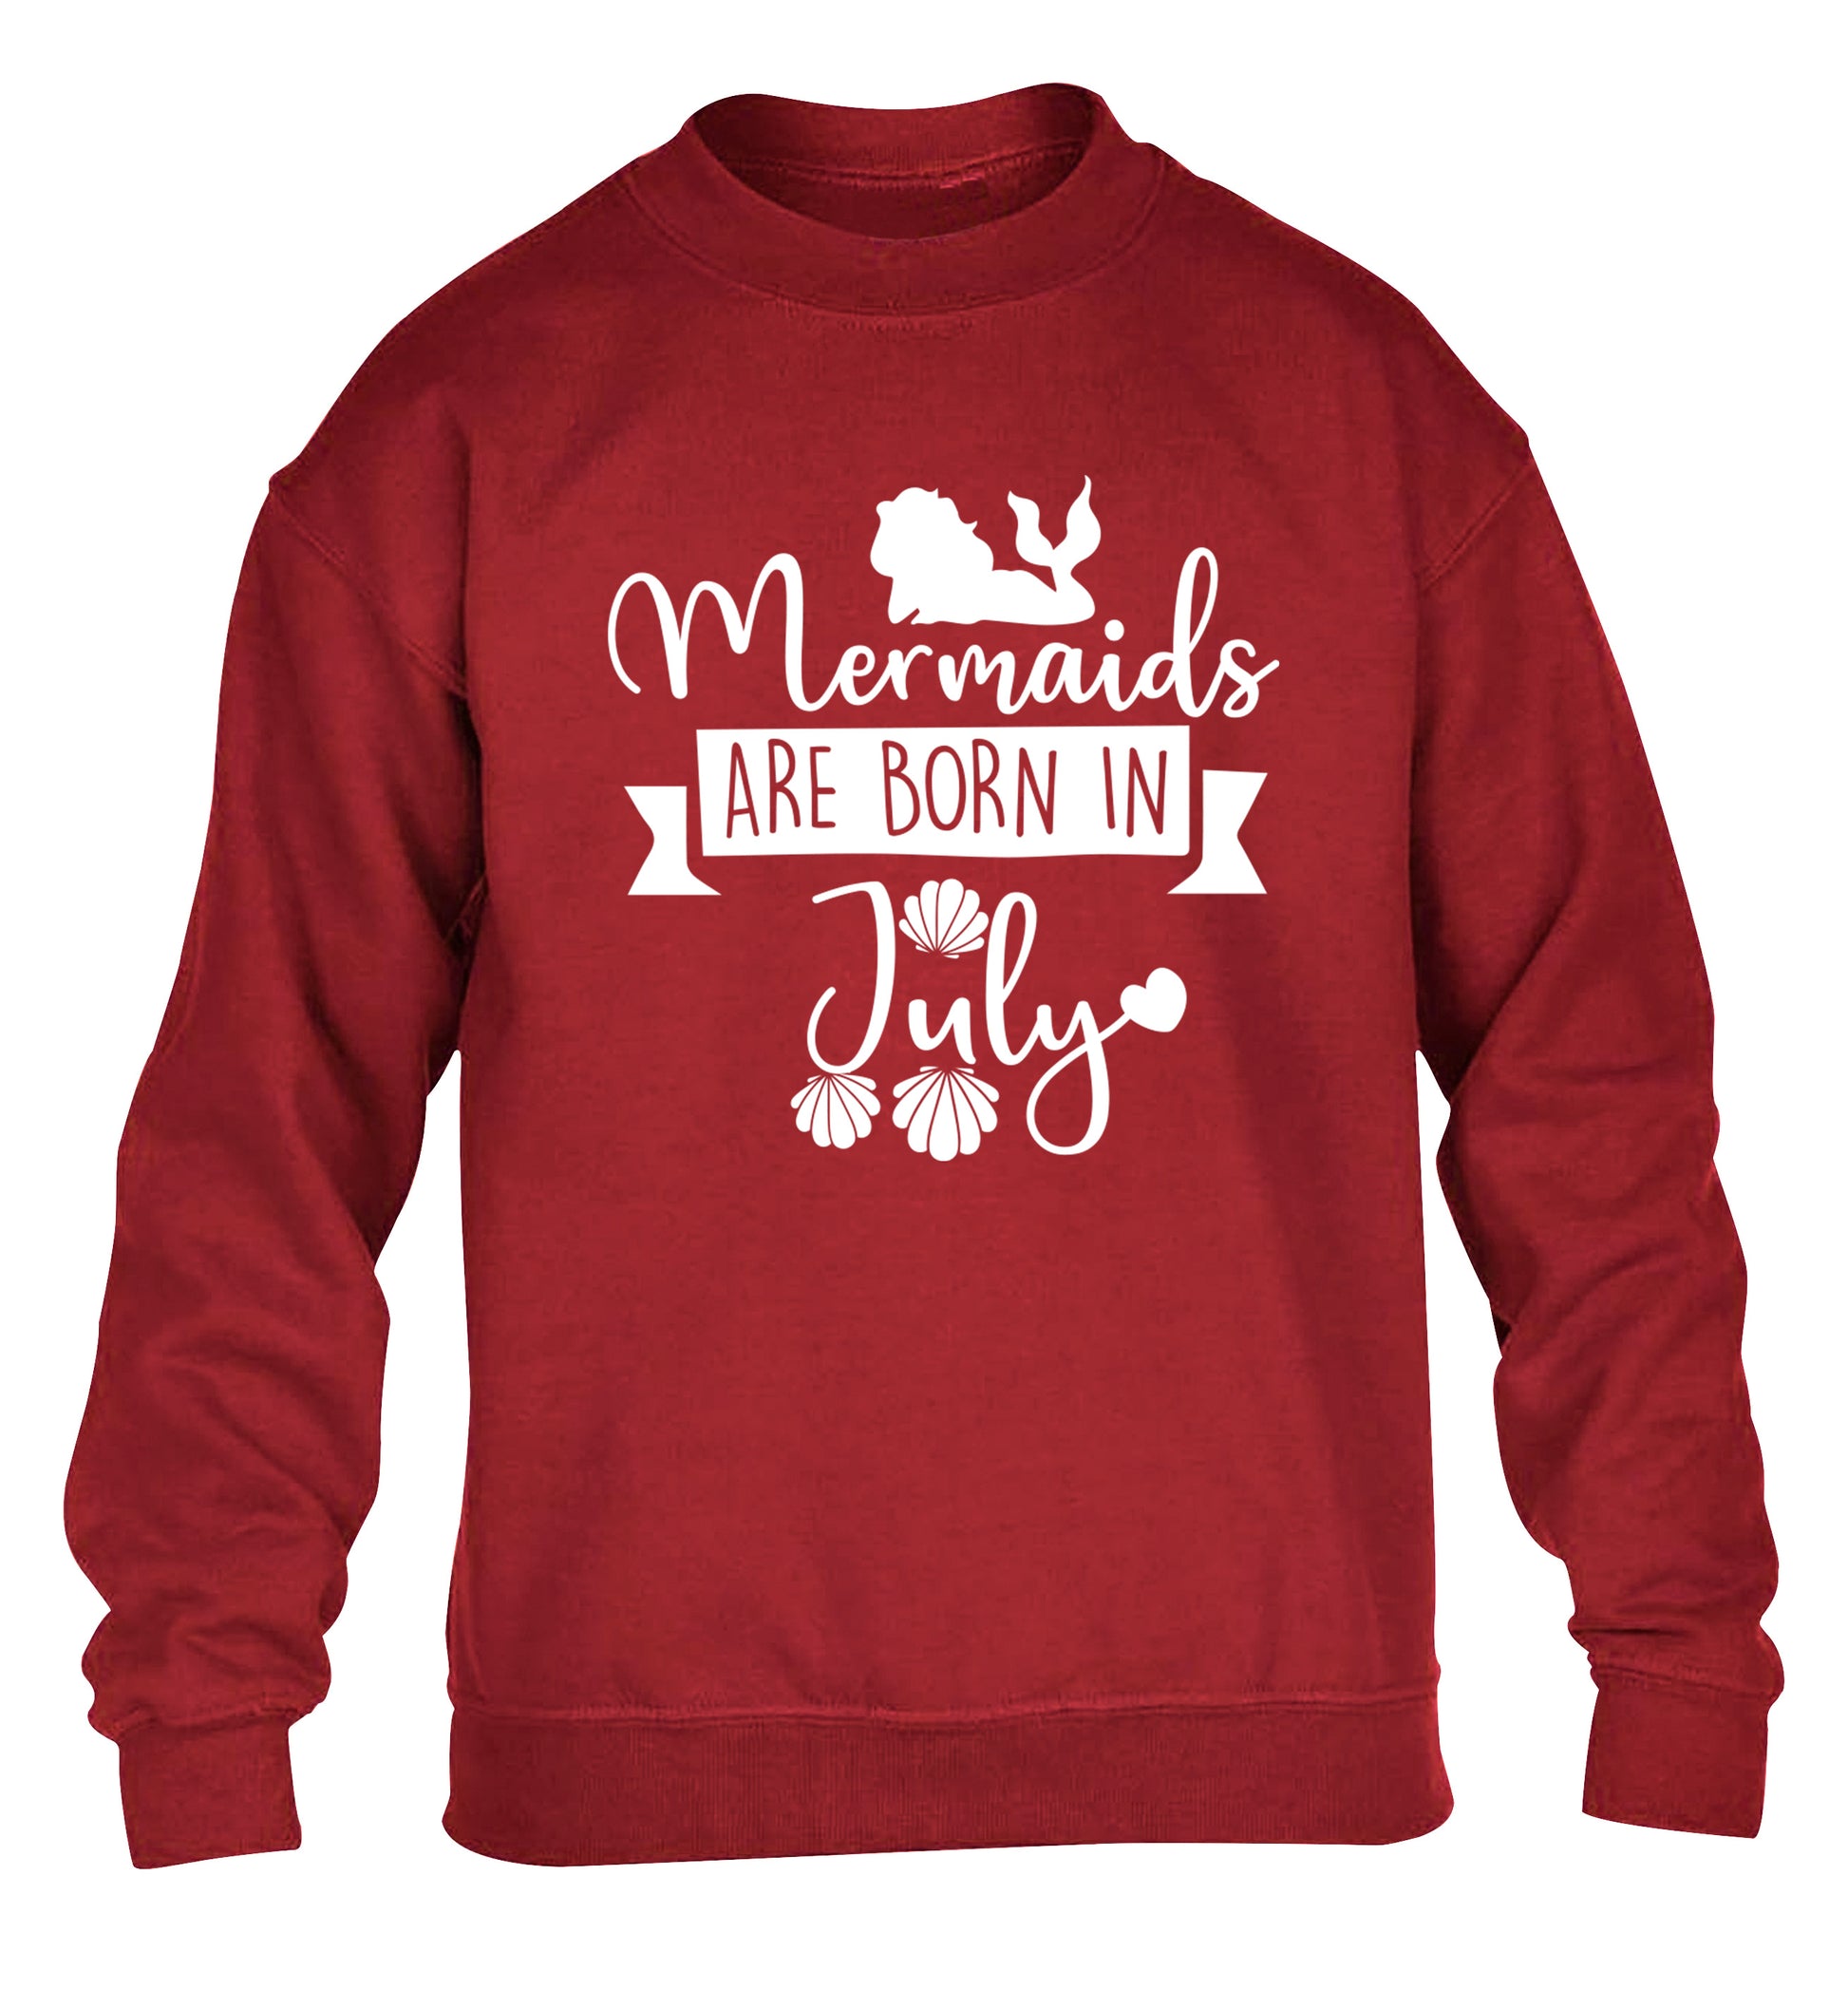 Mermaids are born in July children's grey sweater 12-13 Years